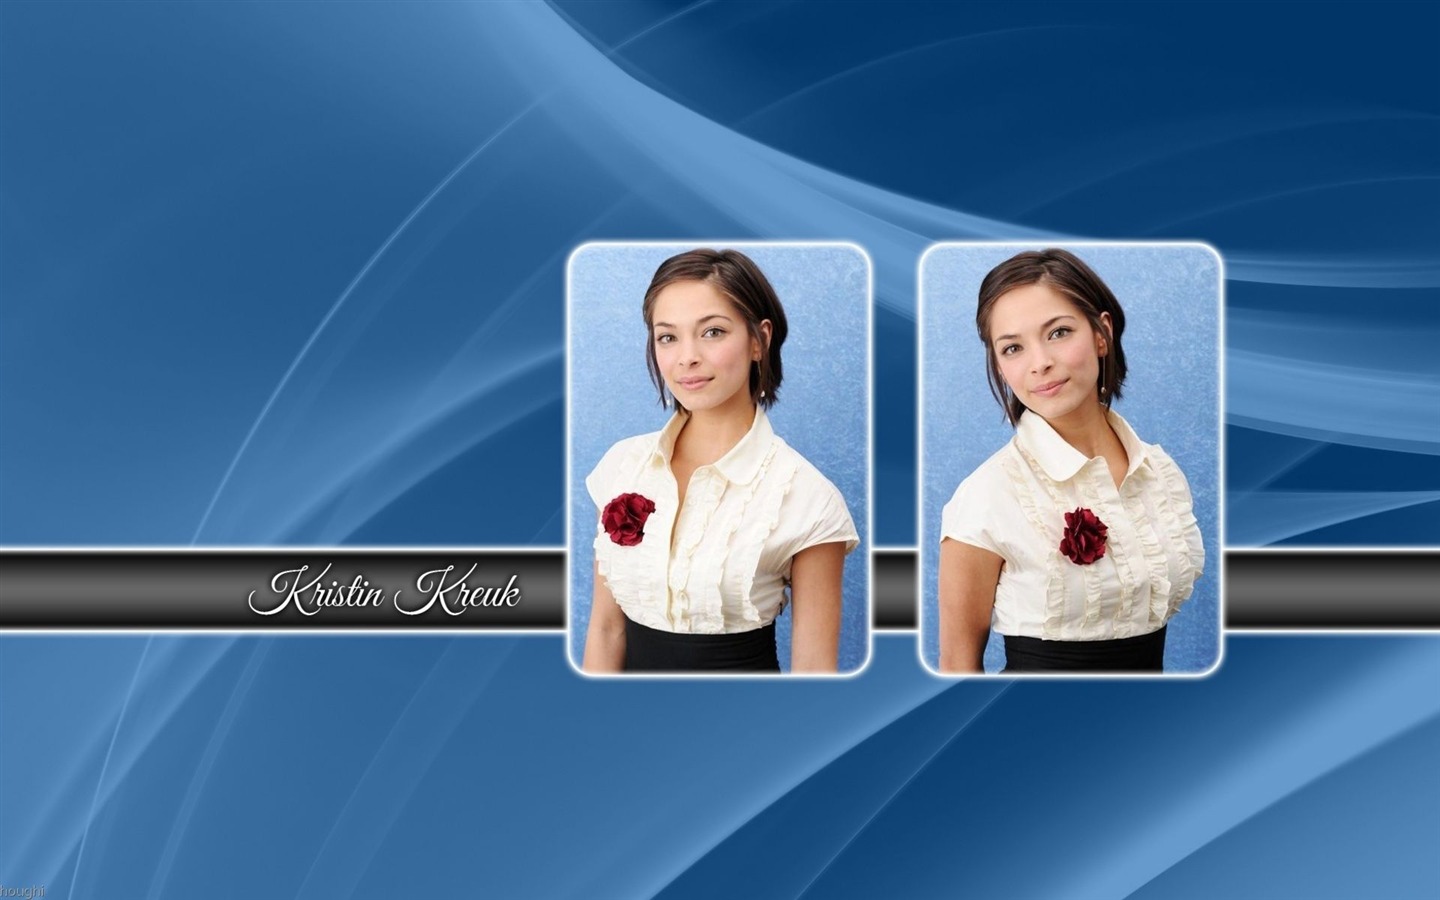 Kristin Kreuk #019 - 1440x900 Wallpapers Pictures Photos Images